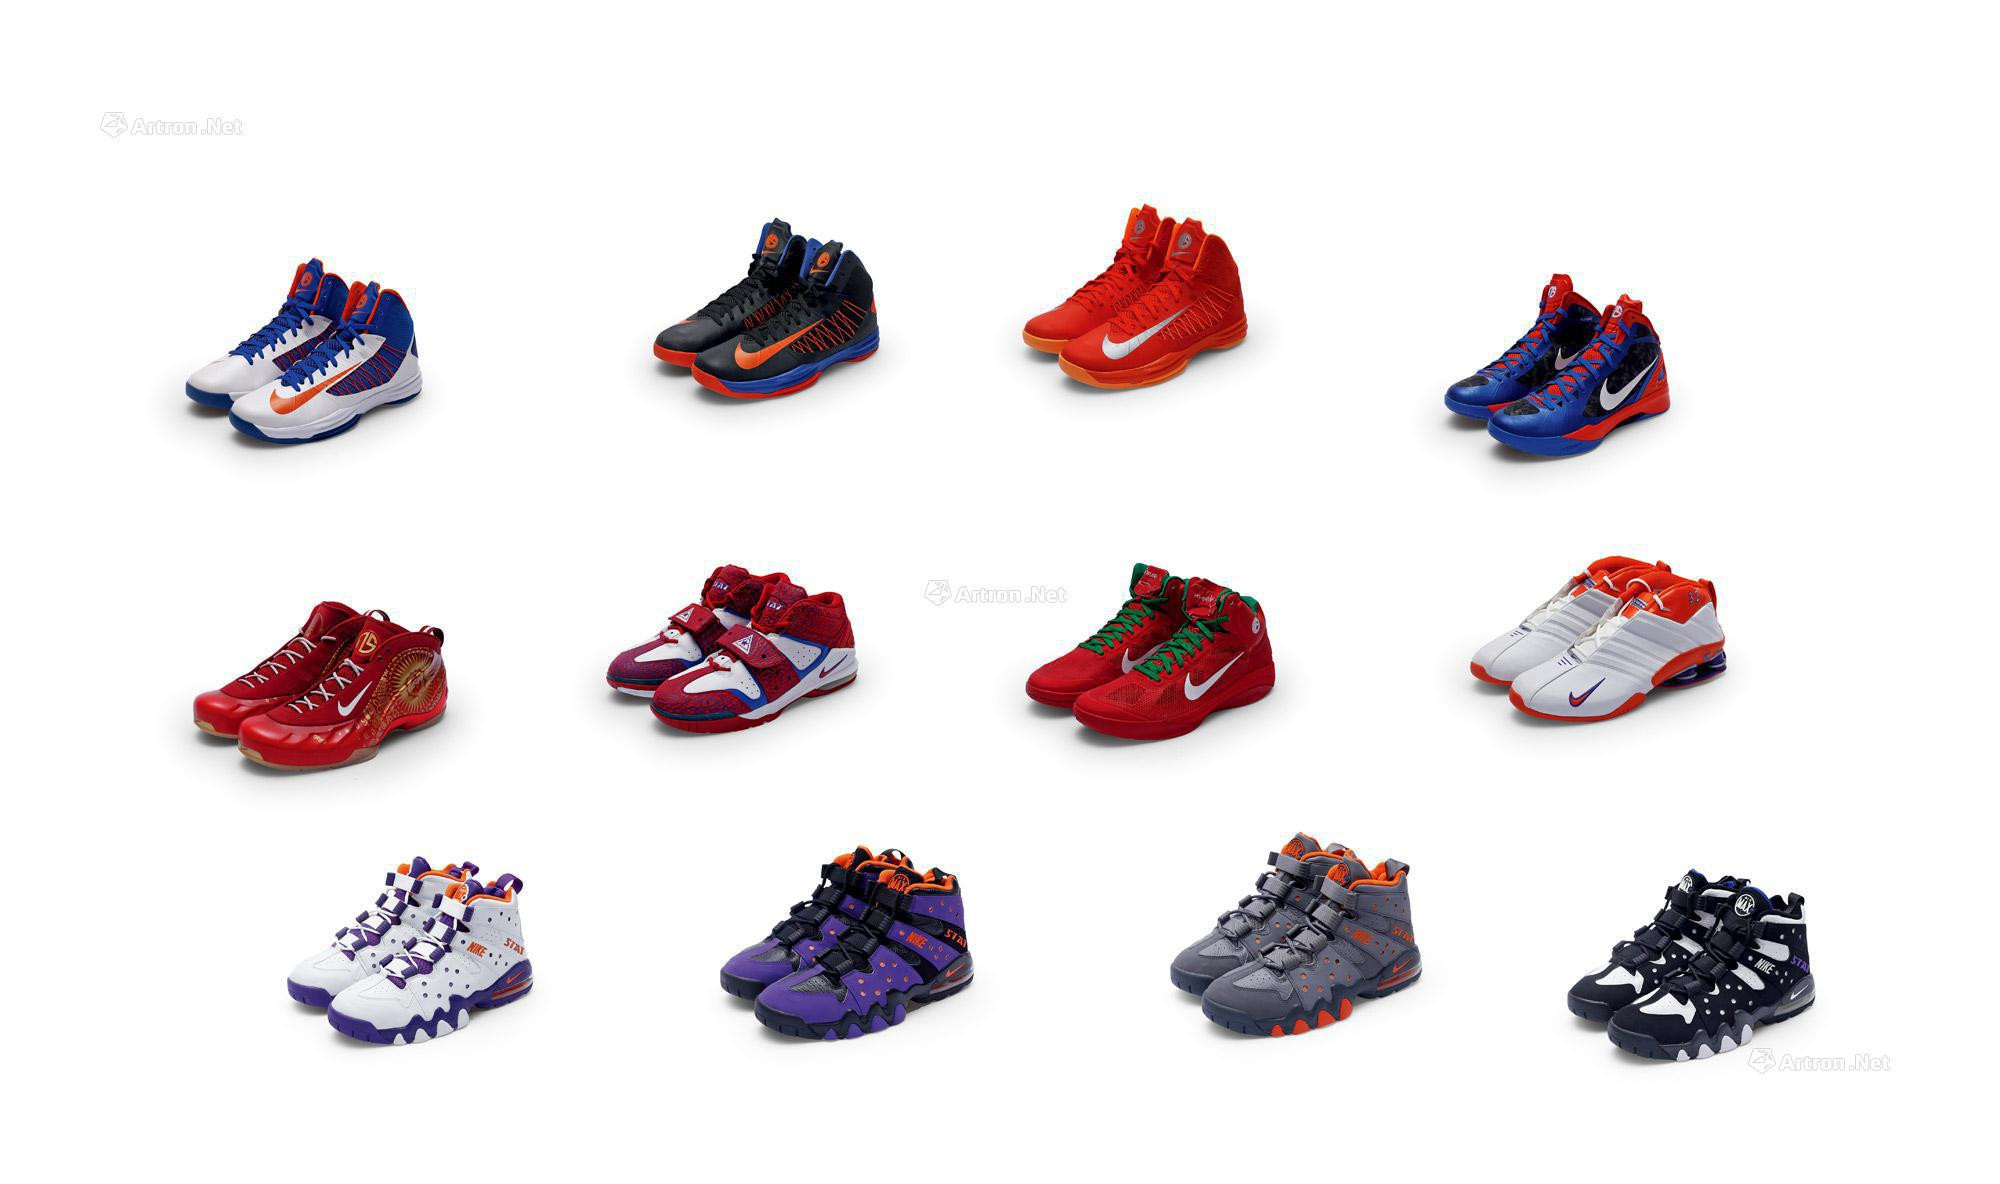 Amar’e Stoudemire Exclusive Sneaker Collection  12 Pairs of Player Exclusive Sneakers